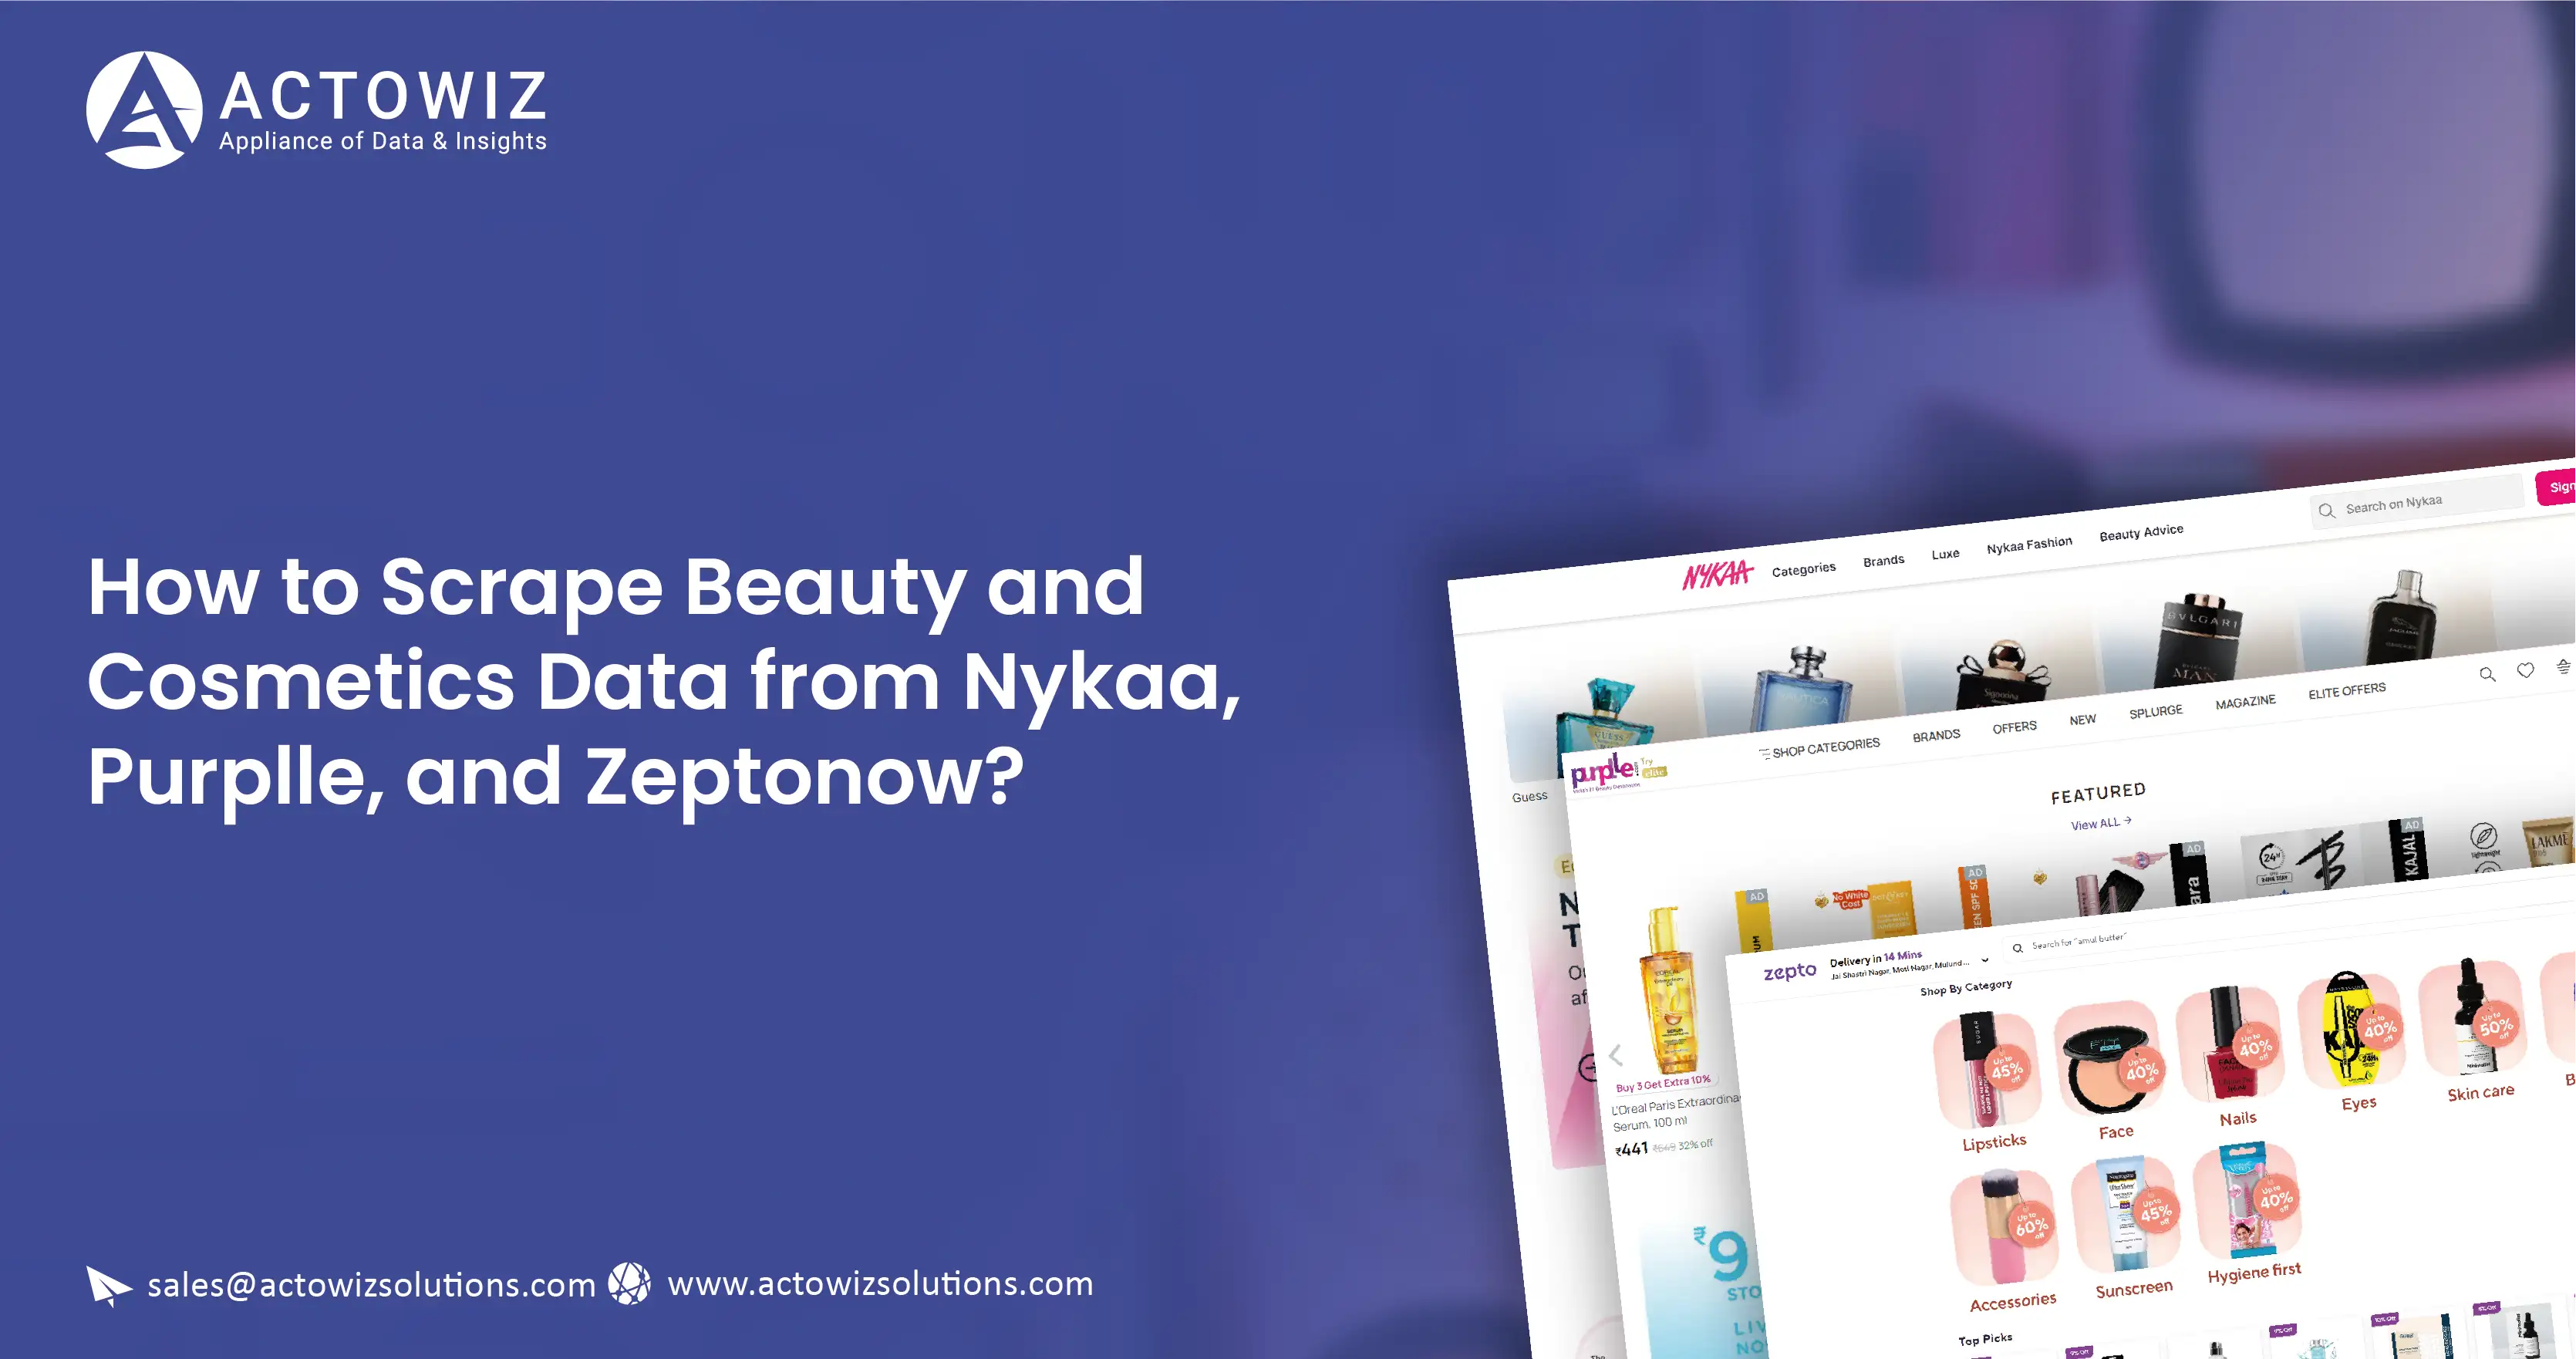 How-to-Scrape-Beauty-and-Cosmetics-Data-from-Nykaa-01